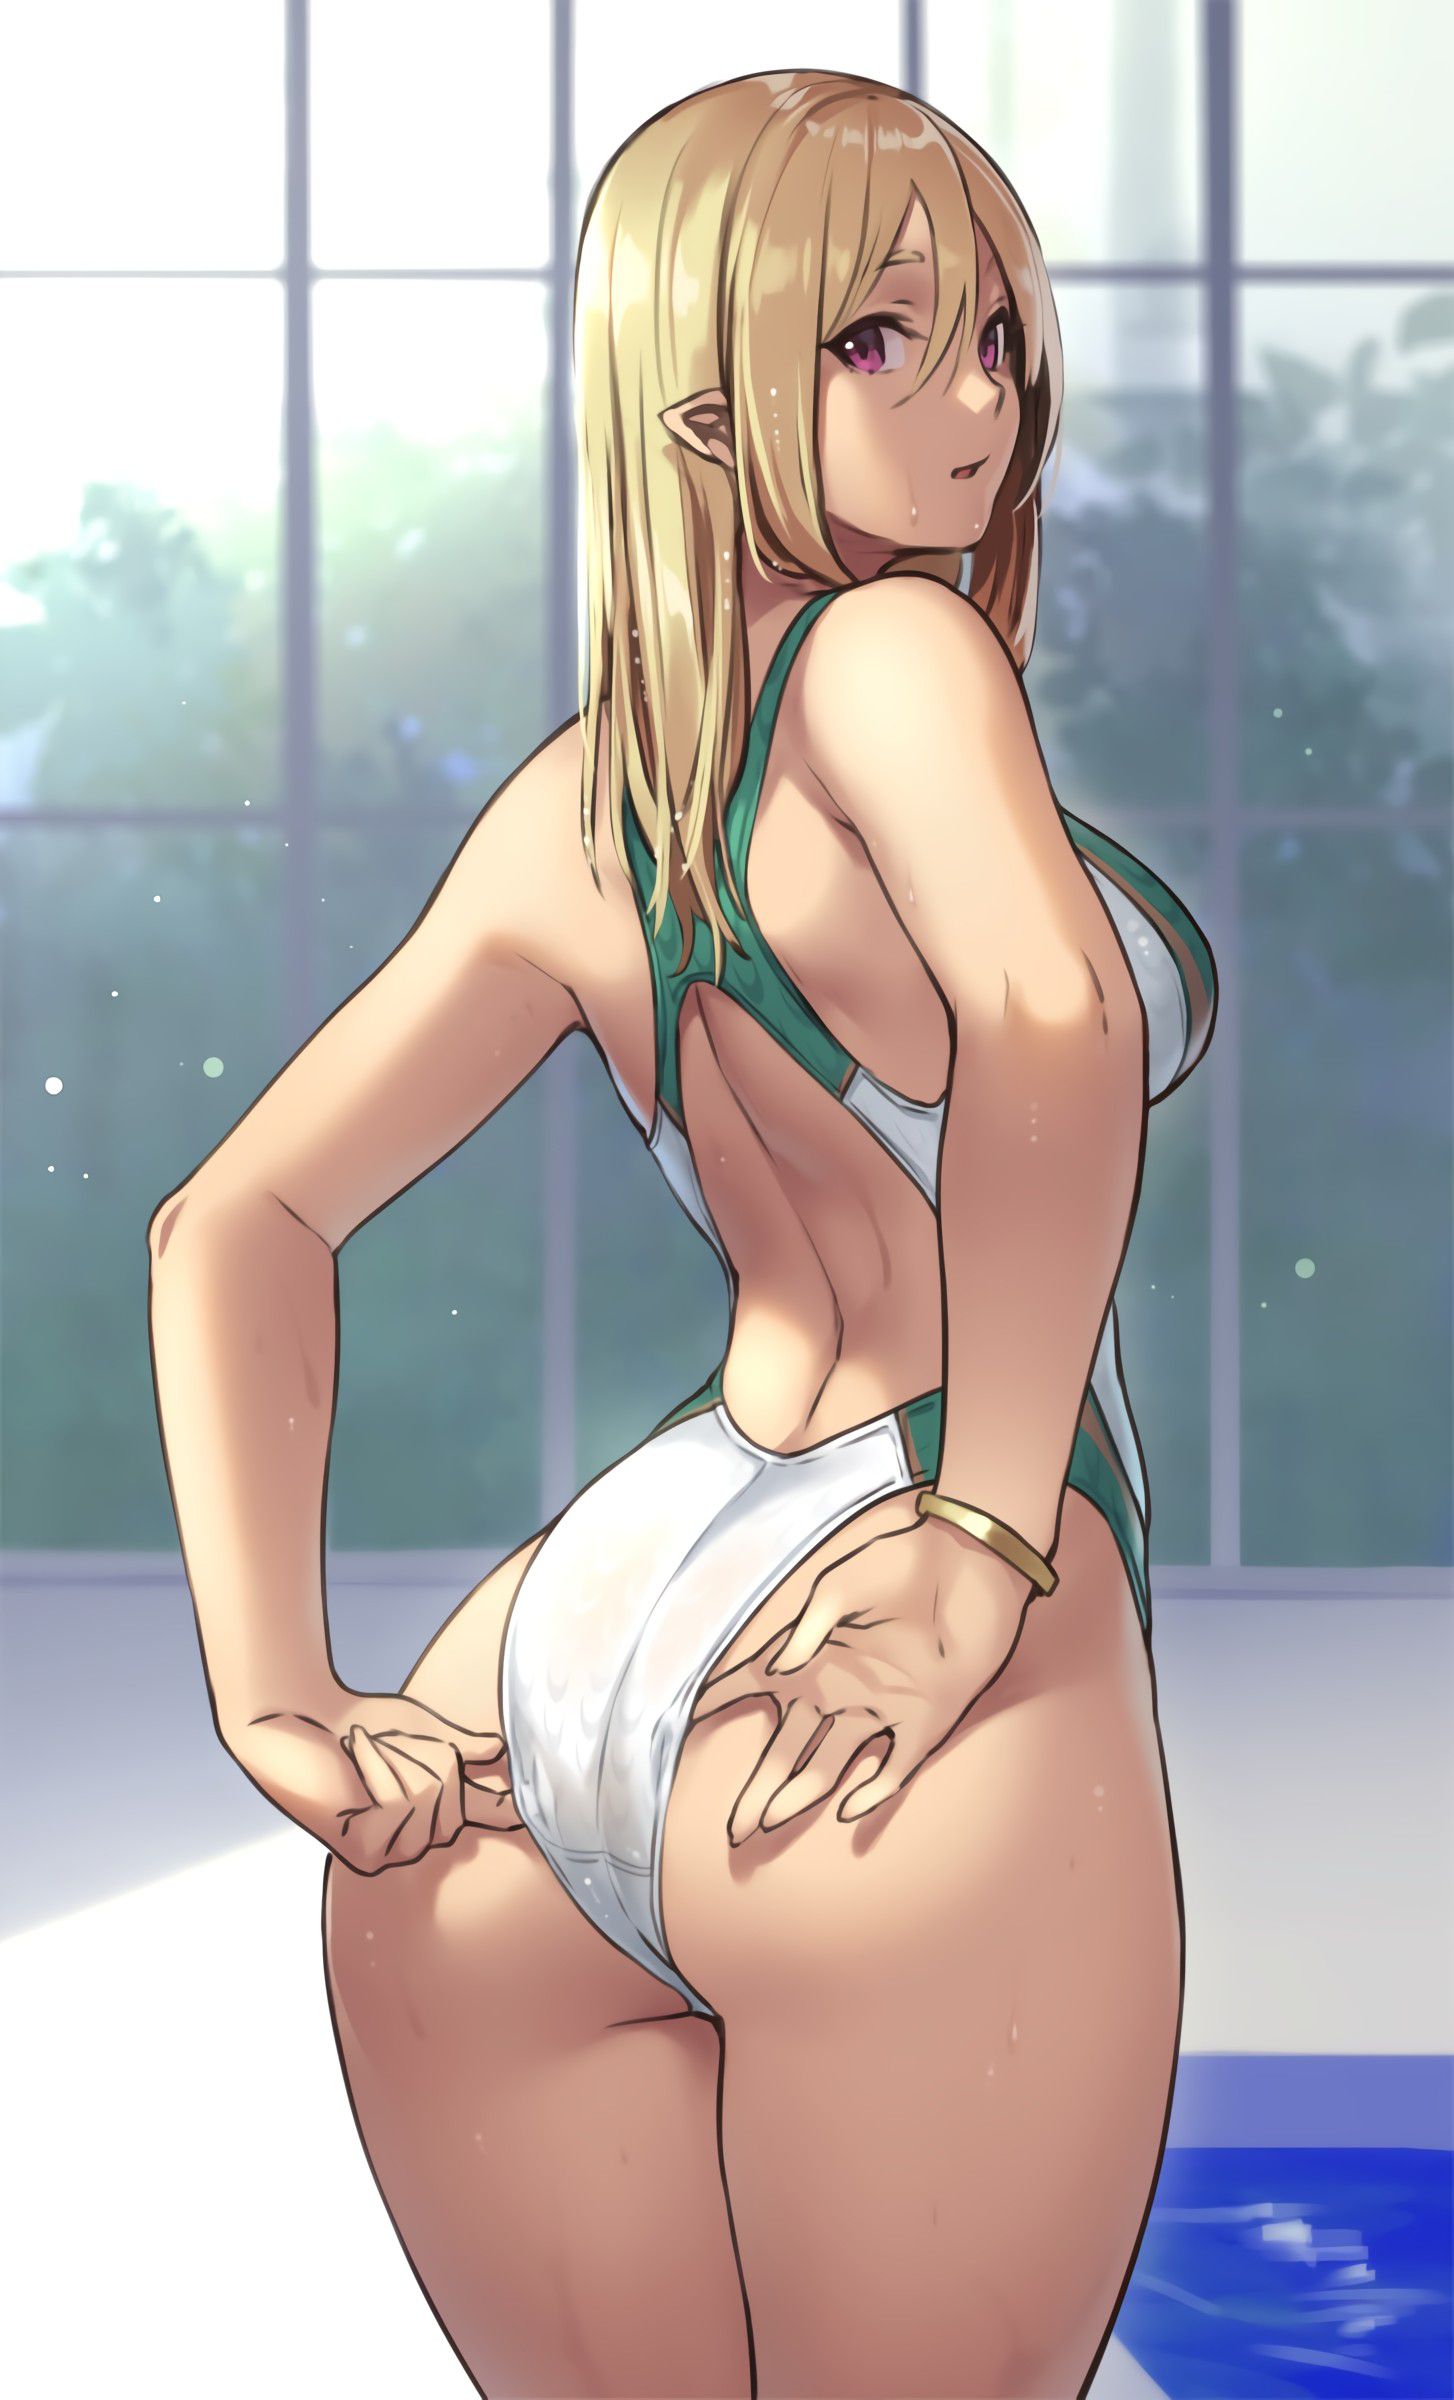 【2nd】Erotic image of a girl in a swimsuit Part 13 29